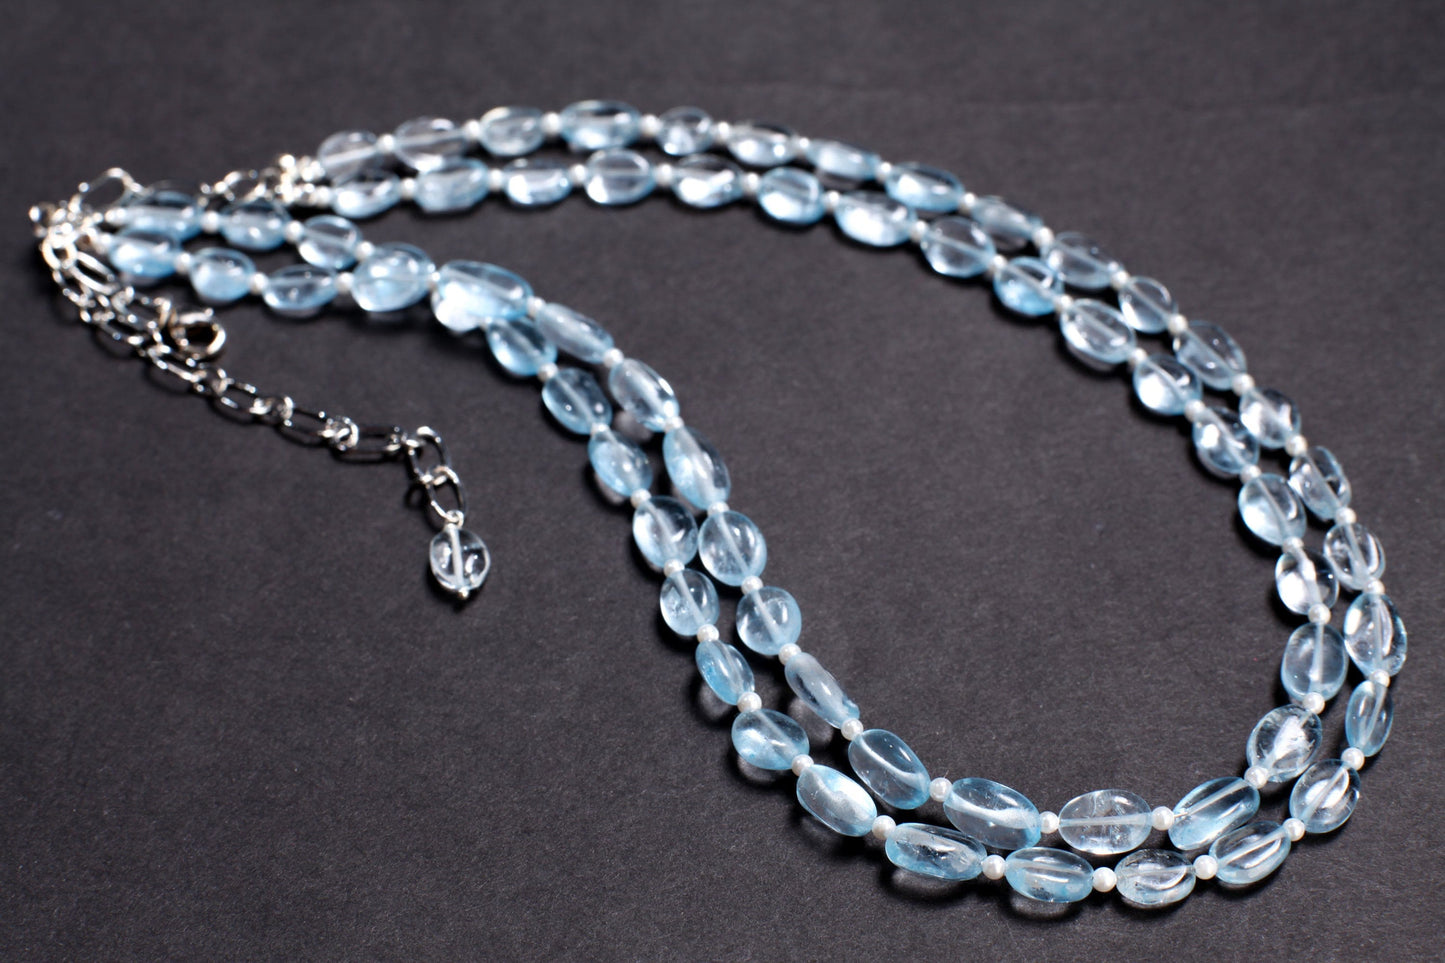 Aqua Blue Quartz Free Form Oval 6x9-7x11mm, 2.5mm Freshwater Pearl Round Spacers 2 Strand Necklace 17.5&quot; with 4.5&quot; Extend to 21&quot;. Gift